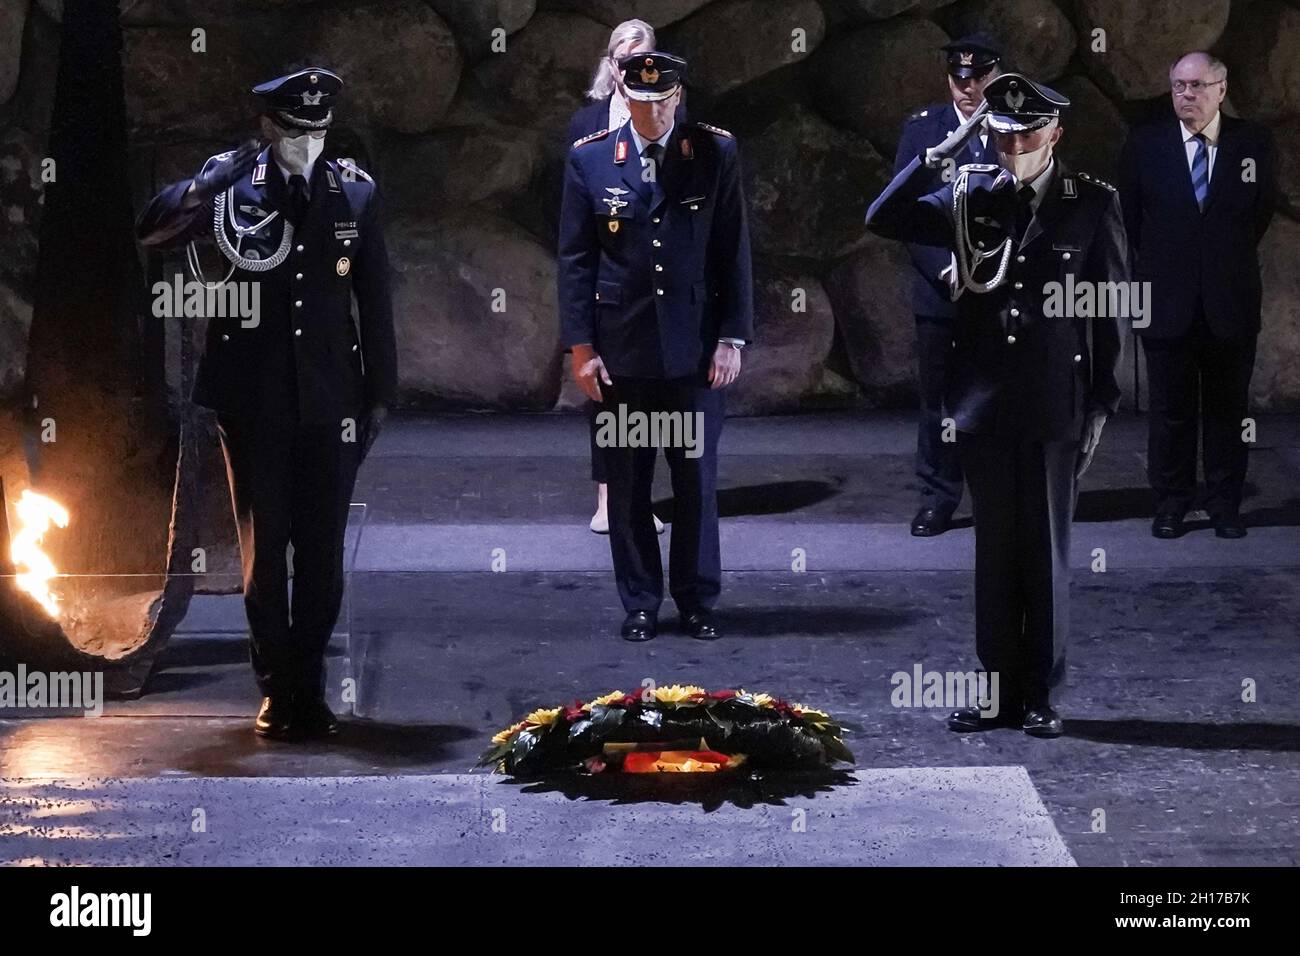 Jerusalem, Israel. 17th October, 2021. German Luftwaffe Commander Lieutenant General INGO GERHARTZ (front center), escorted by Israeli counterpart Air Force Commander Maj. Gen. AMIKAM NORKIN, partake in a memorial ceremony in the Hall of Remembrance while on a tour of the Yad Vashem Holocaust Museum, prior to the start of the Blue Flag 2021 excersize. The international exercise, considered the largest and most advanced aerial exercise in Israel, takes place with the participation of air forces from Israel, Germany, Italy, Britain, France, India, Greece and the United States. Credit: Nir Alon/A Stock Photo